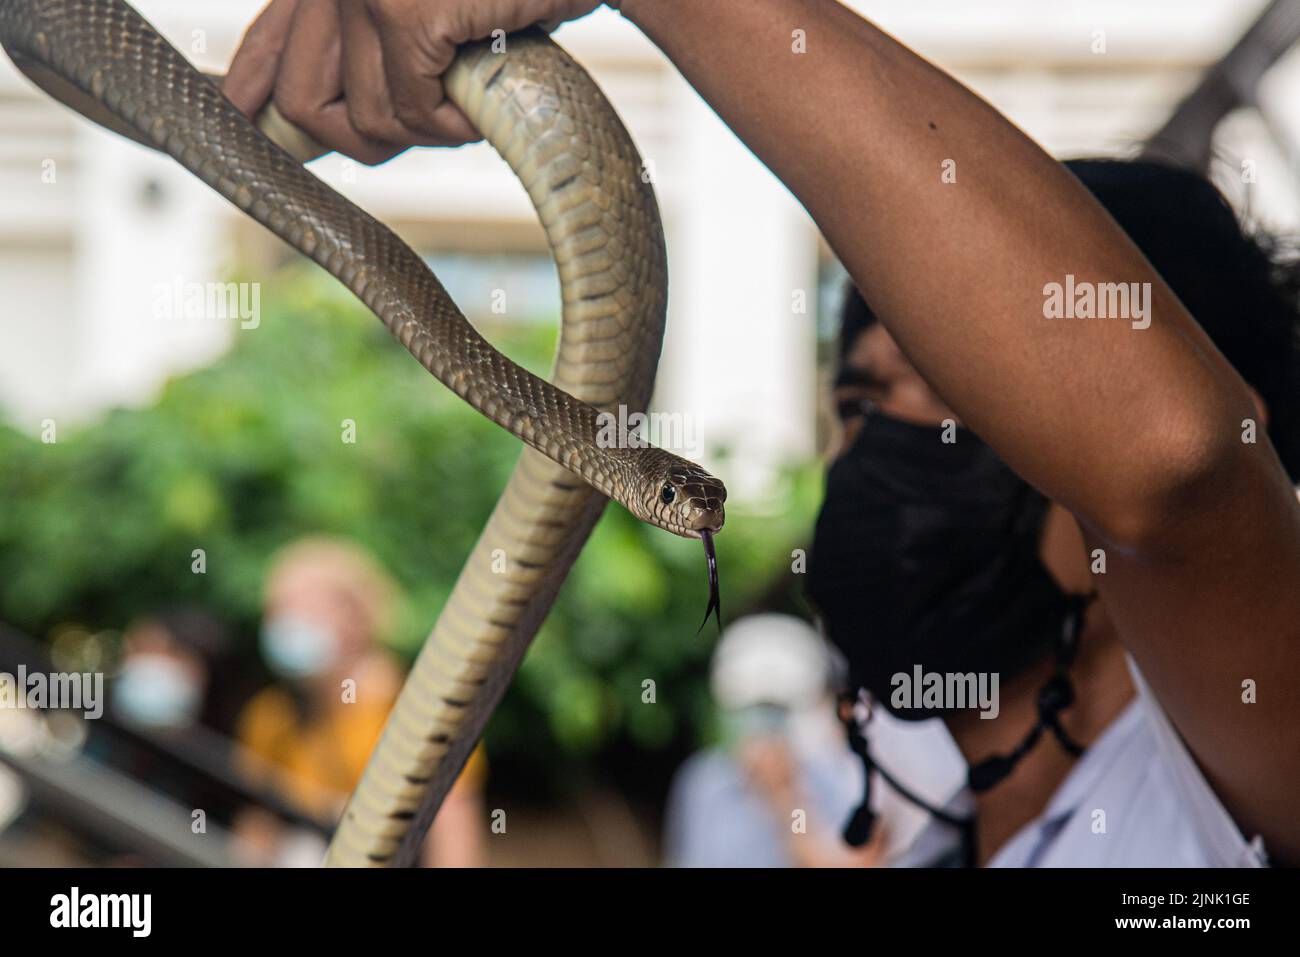 Bangkok, Thailand. 12th Aug, 2022. A Thai snake expert holds a Rat Snake during a snake show at the Queen Saovabha Memorial Institute and Snake Farm in Bangkok. The Queen Saovabha Memorial Institute also known as the Bangkok Snake Farm was founded on 1923 to raised venomous snakes for venom extraction and production of antivenom for Thailand and surrounding regions where venomous snakes are endemic. The institute also serves as a museum to inform the general public about snakes in Thailand. Credit: SOPA Images Limited/Alamy Live News Stock Photo